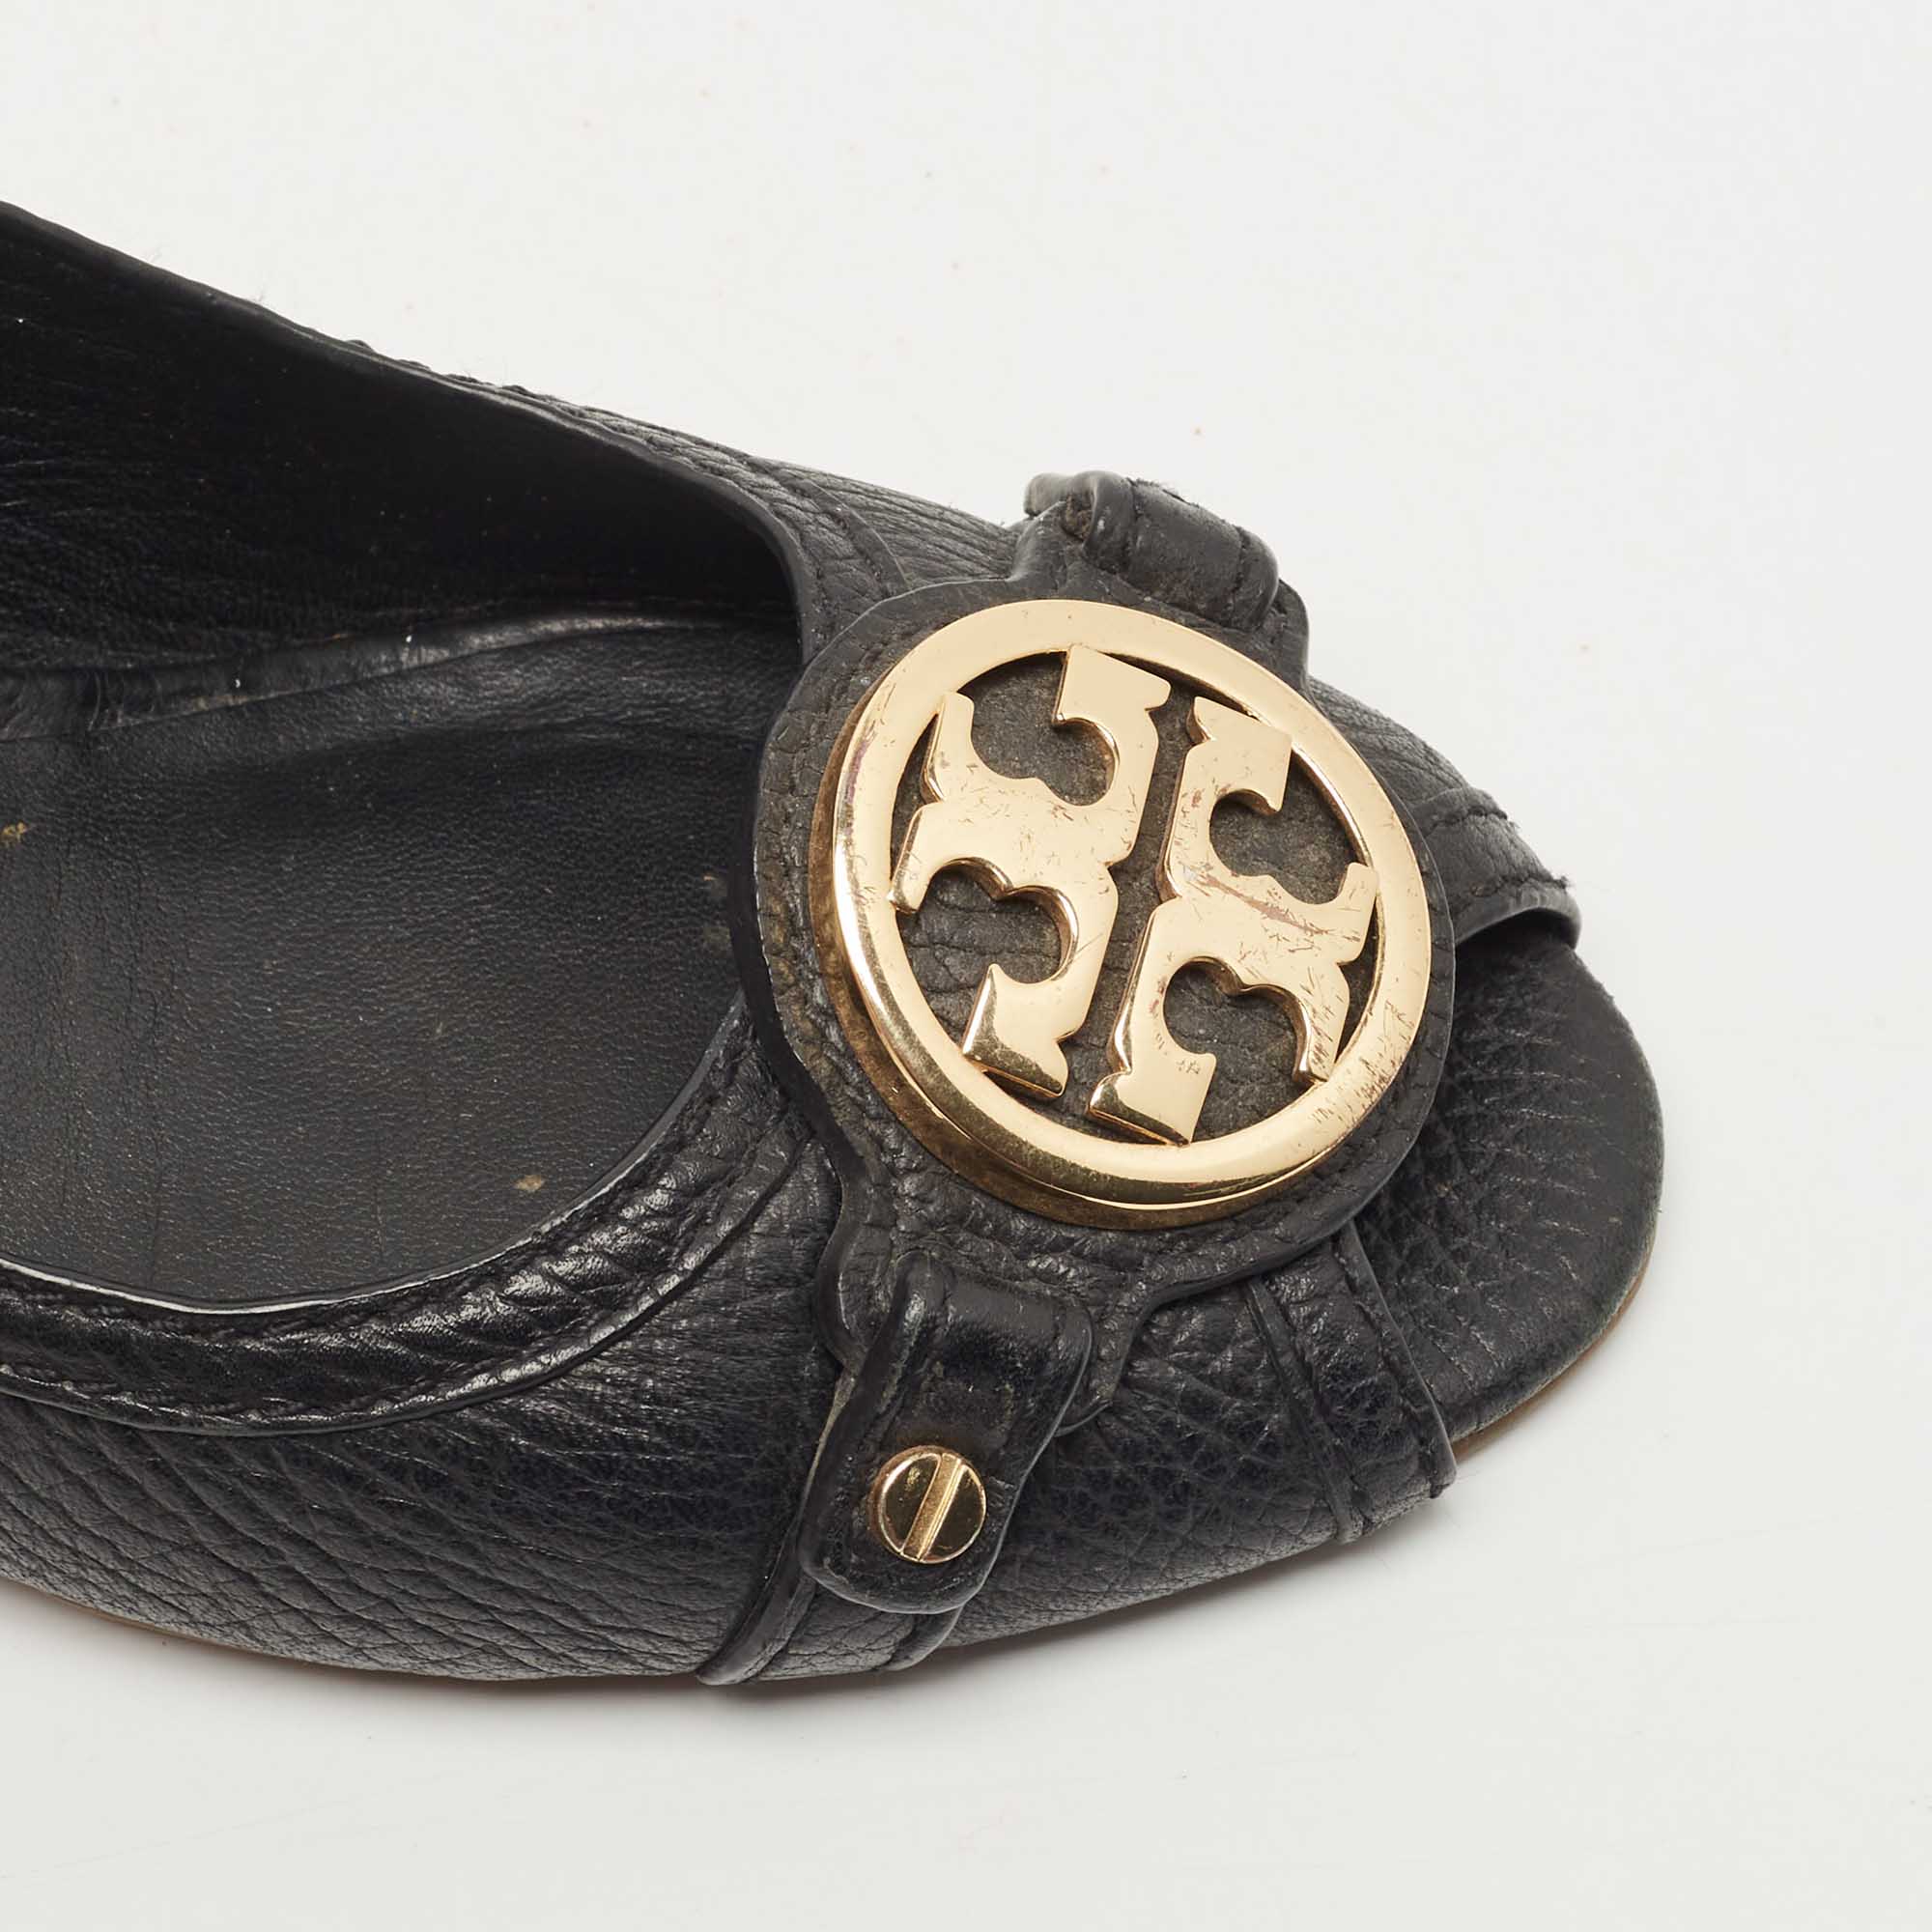 Tory Burch Black Leather Sally Wedge Pumps Size 39.5